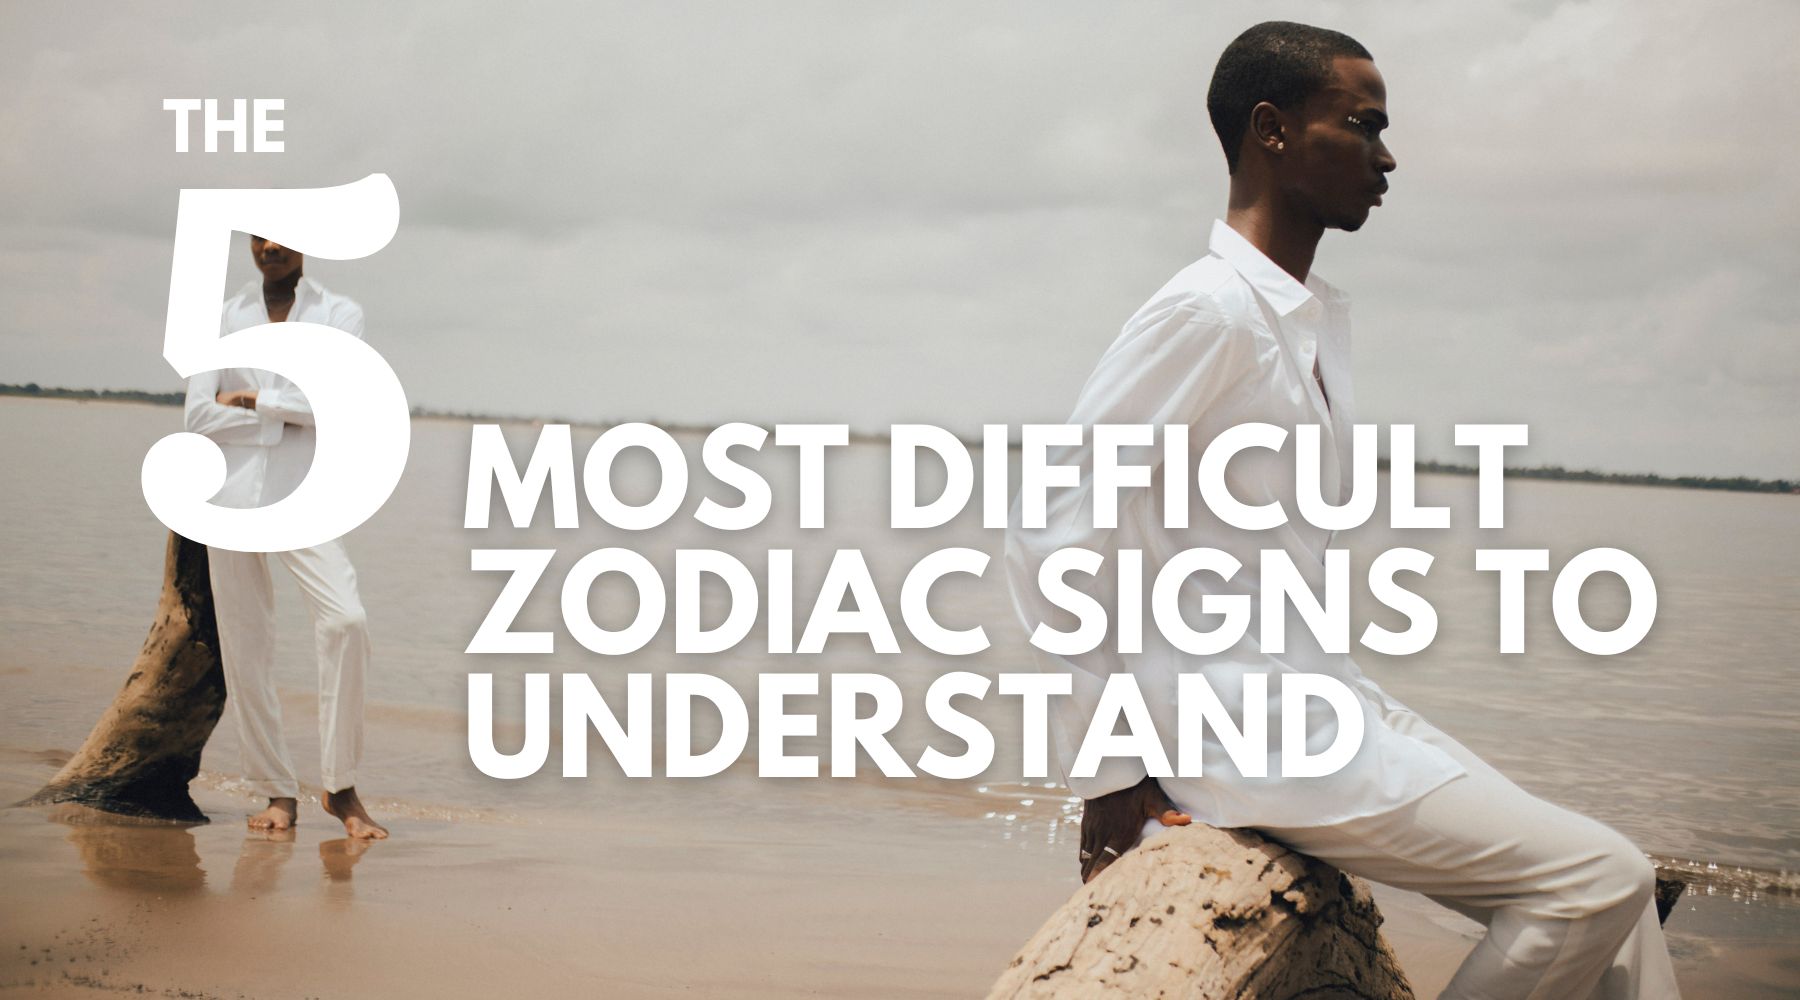 The 5 most difficult zodiac signs to understands-What make it so hard with them?